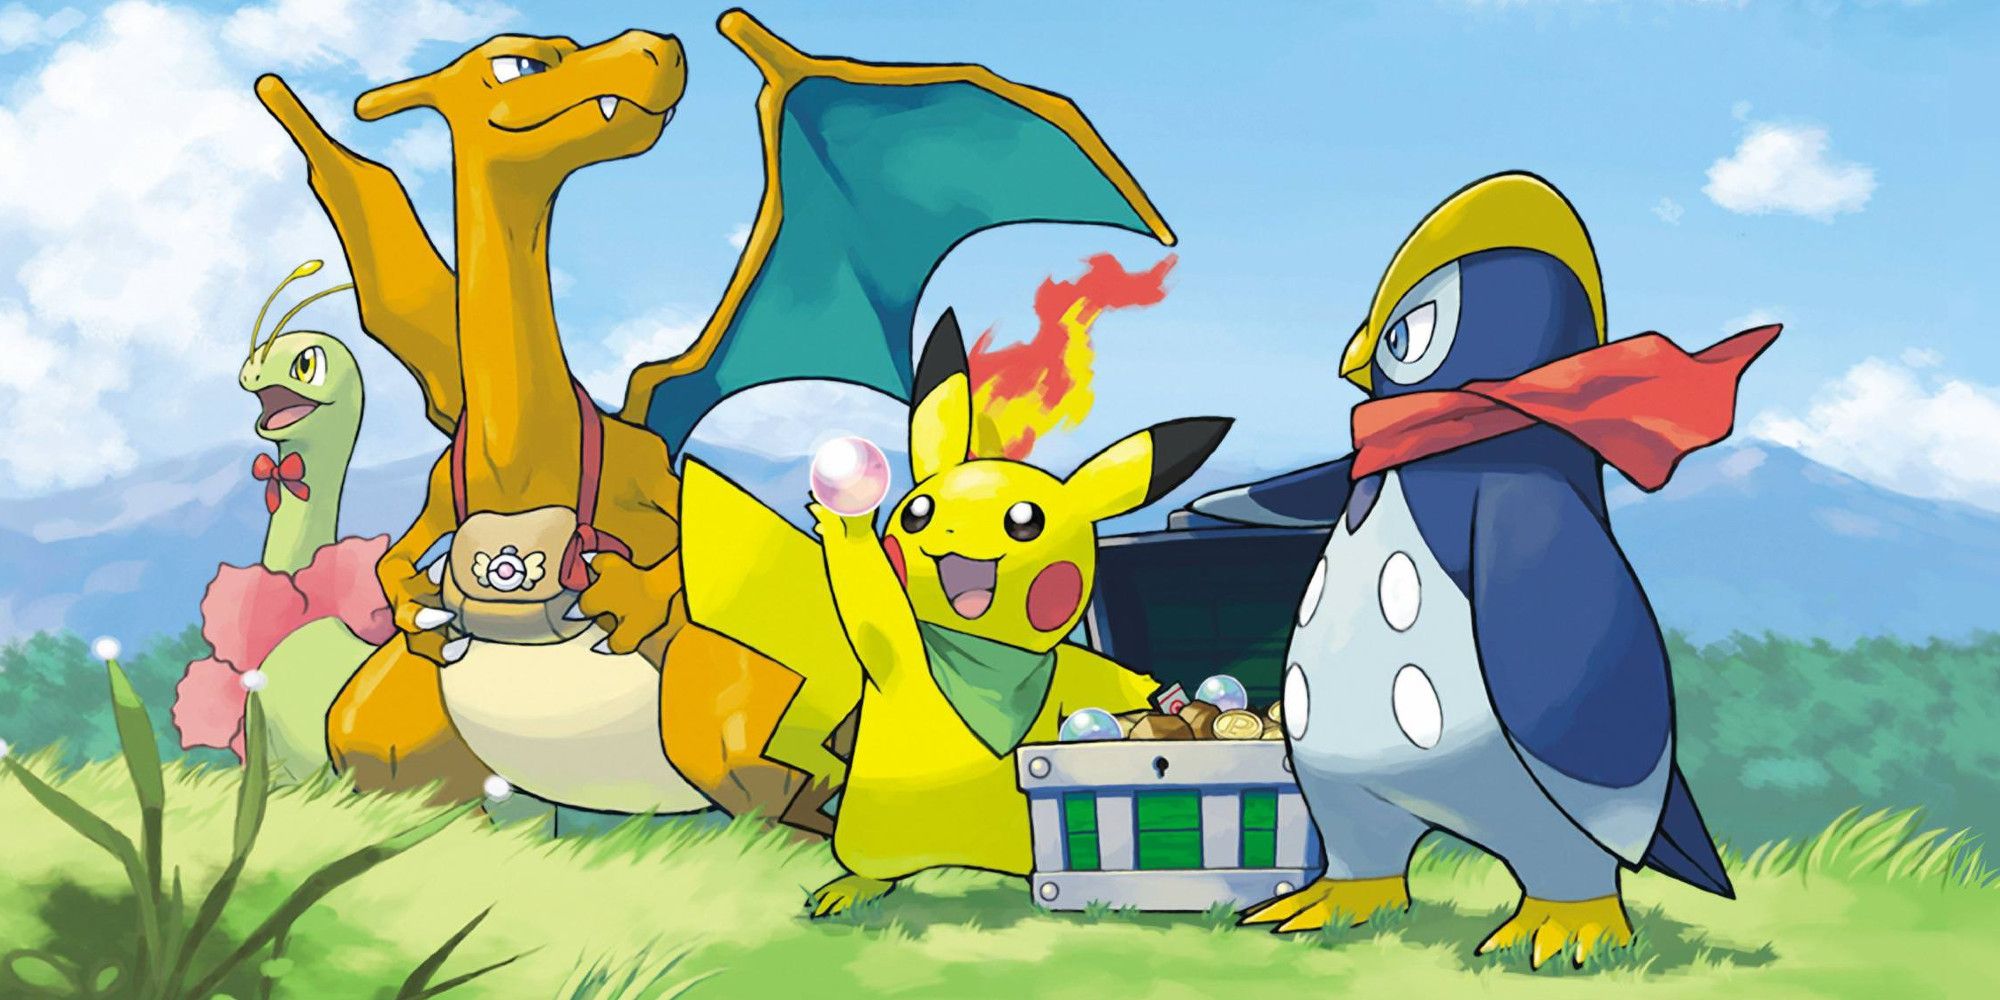 Meganium, Charizard, Pikachu, and Prinplup in Pokemon Mystery Dungeon: Explorers of Sky